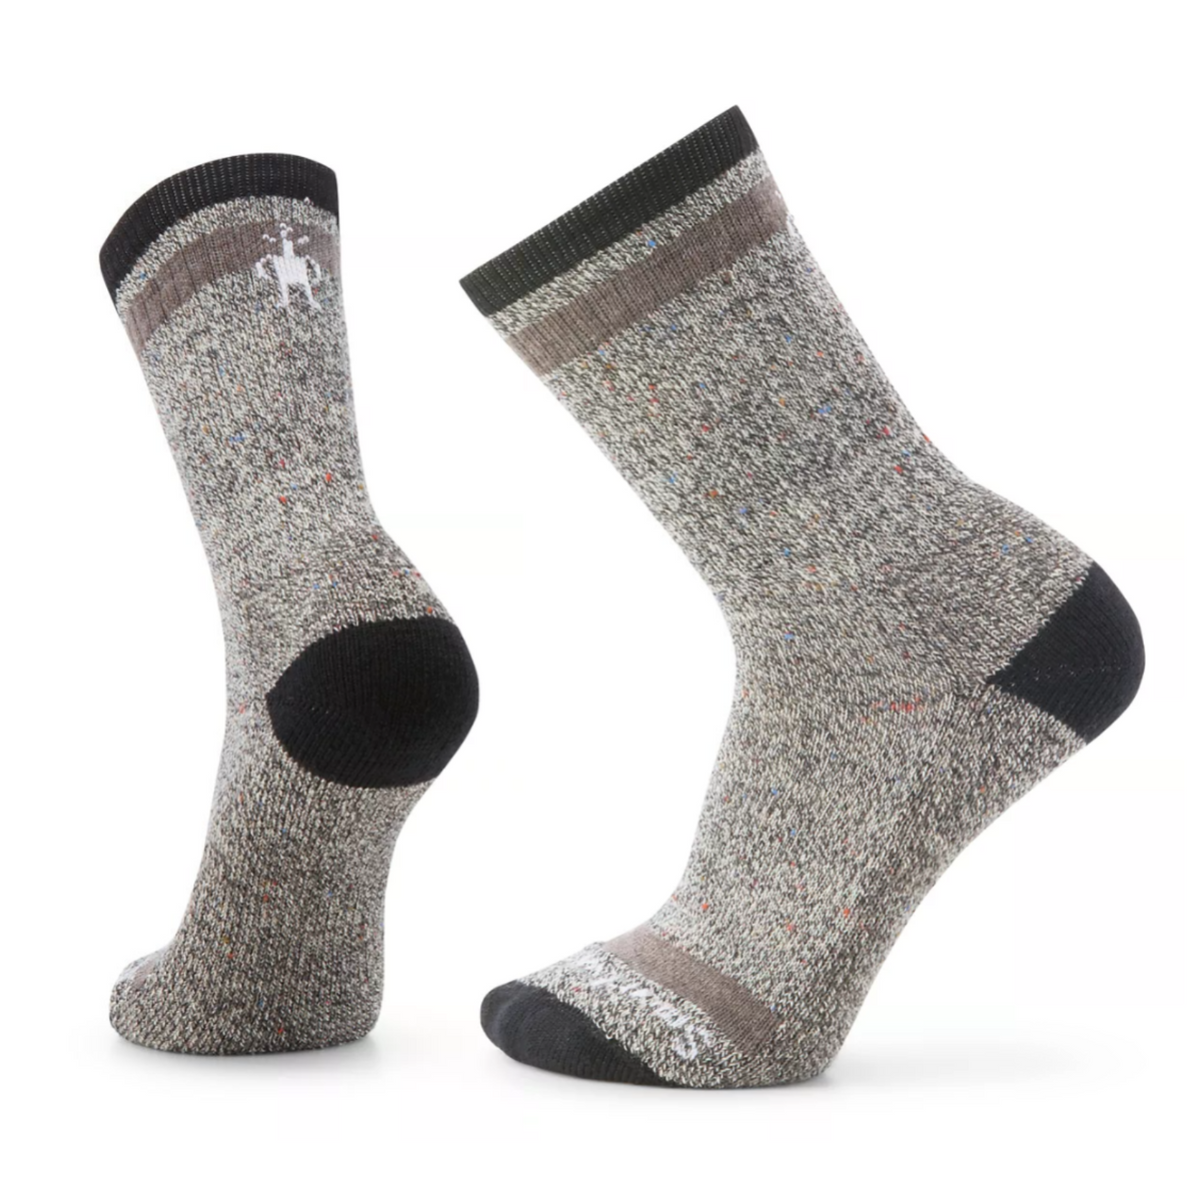 Smartwool Larimer Crew men&#39;s sock featuring gray sock with black and brown bands around top. Black cuff, heel, and toe. Shown on display feet. 